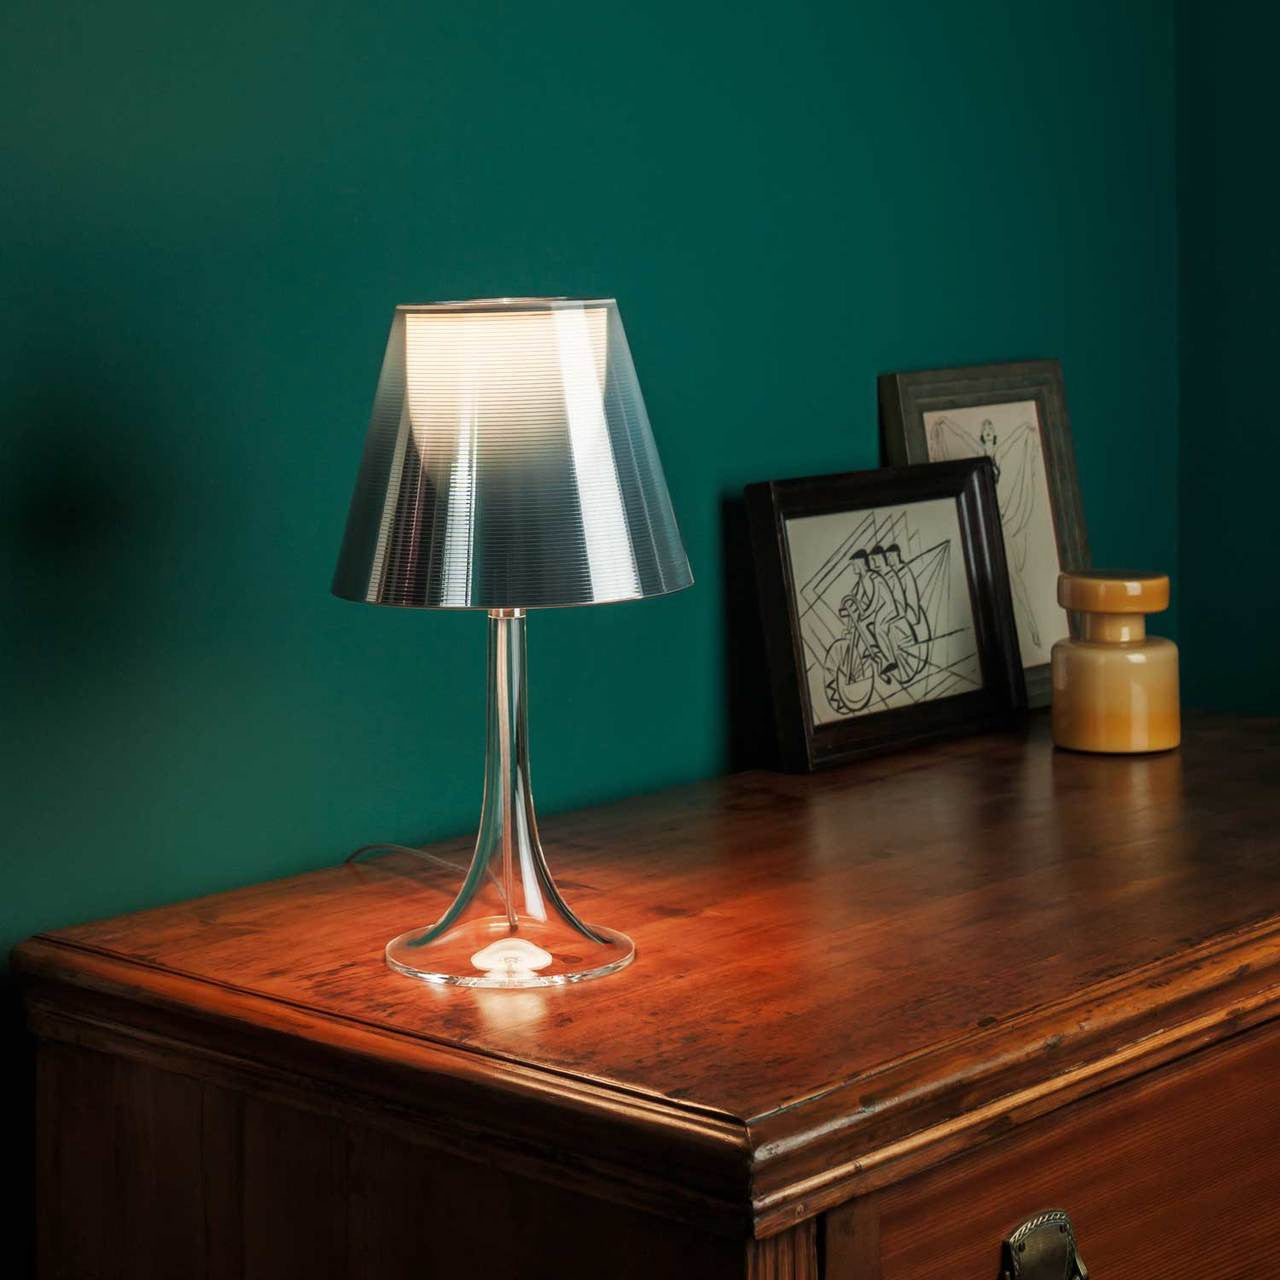 Miss K Table Lamp by Philippe Starck for Kartell